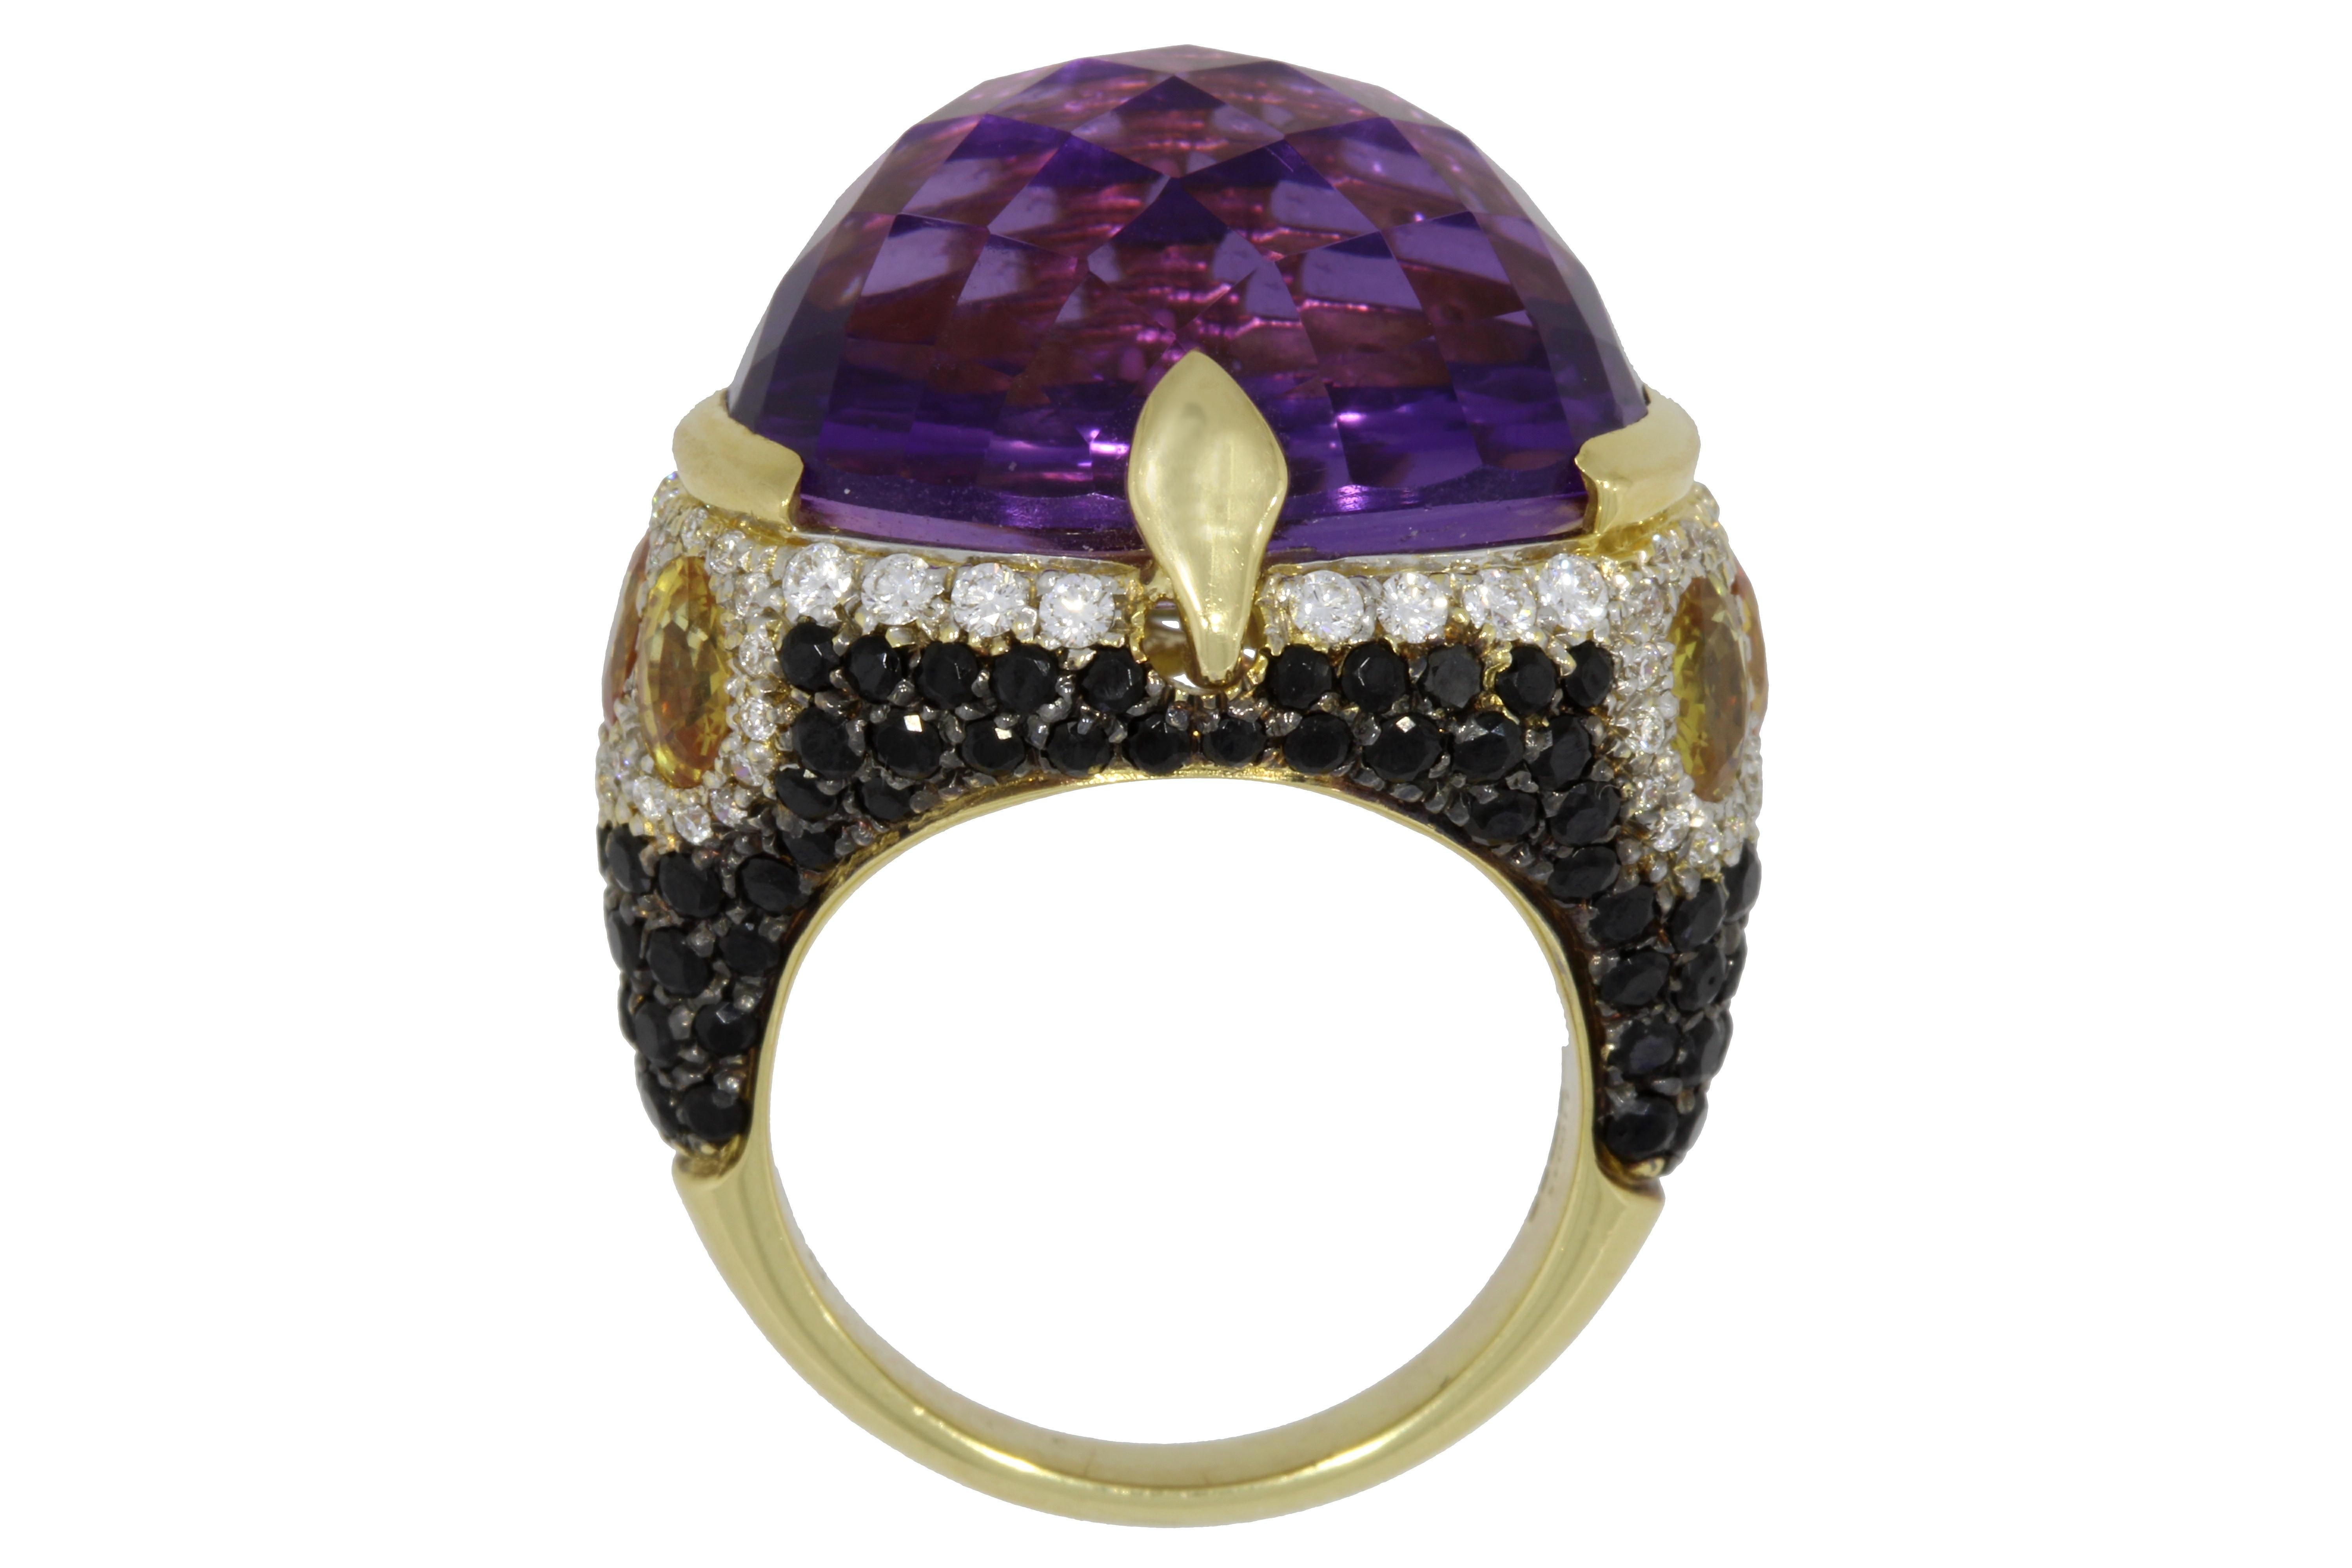 Regal in appearance, a striking domed faceted amethyst sits amongst an offering of feminine oval cut citrines surrounded by a majestic pave of brilliant cut diamonds and black spinel’s.

Amethyst Citrine and Diamond Venice ring
18 karat Rose Gold   